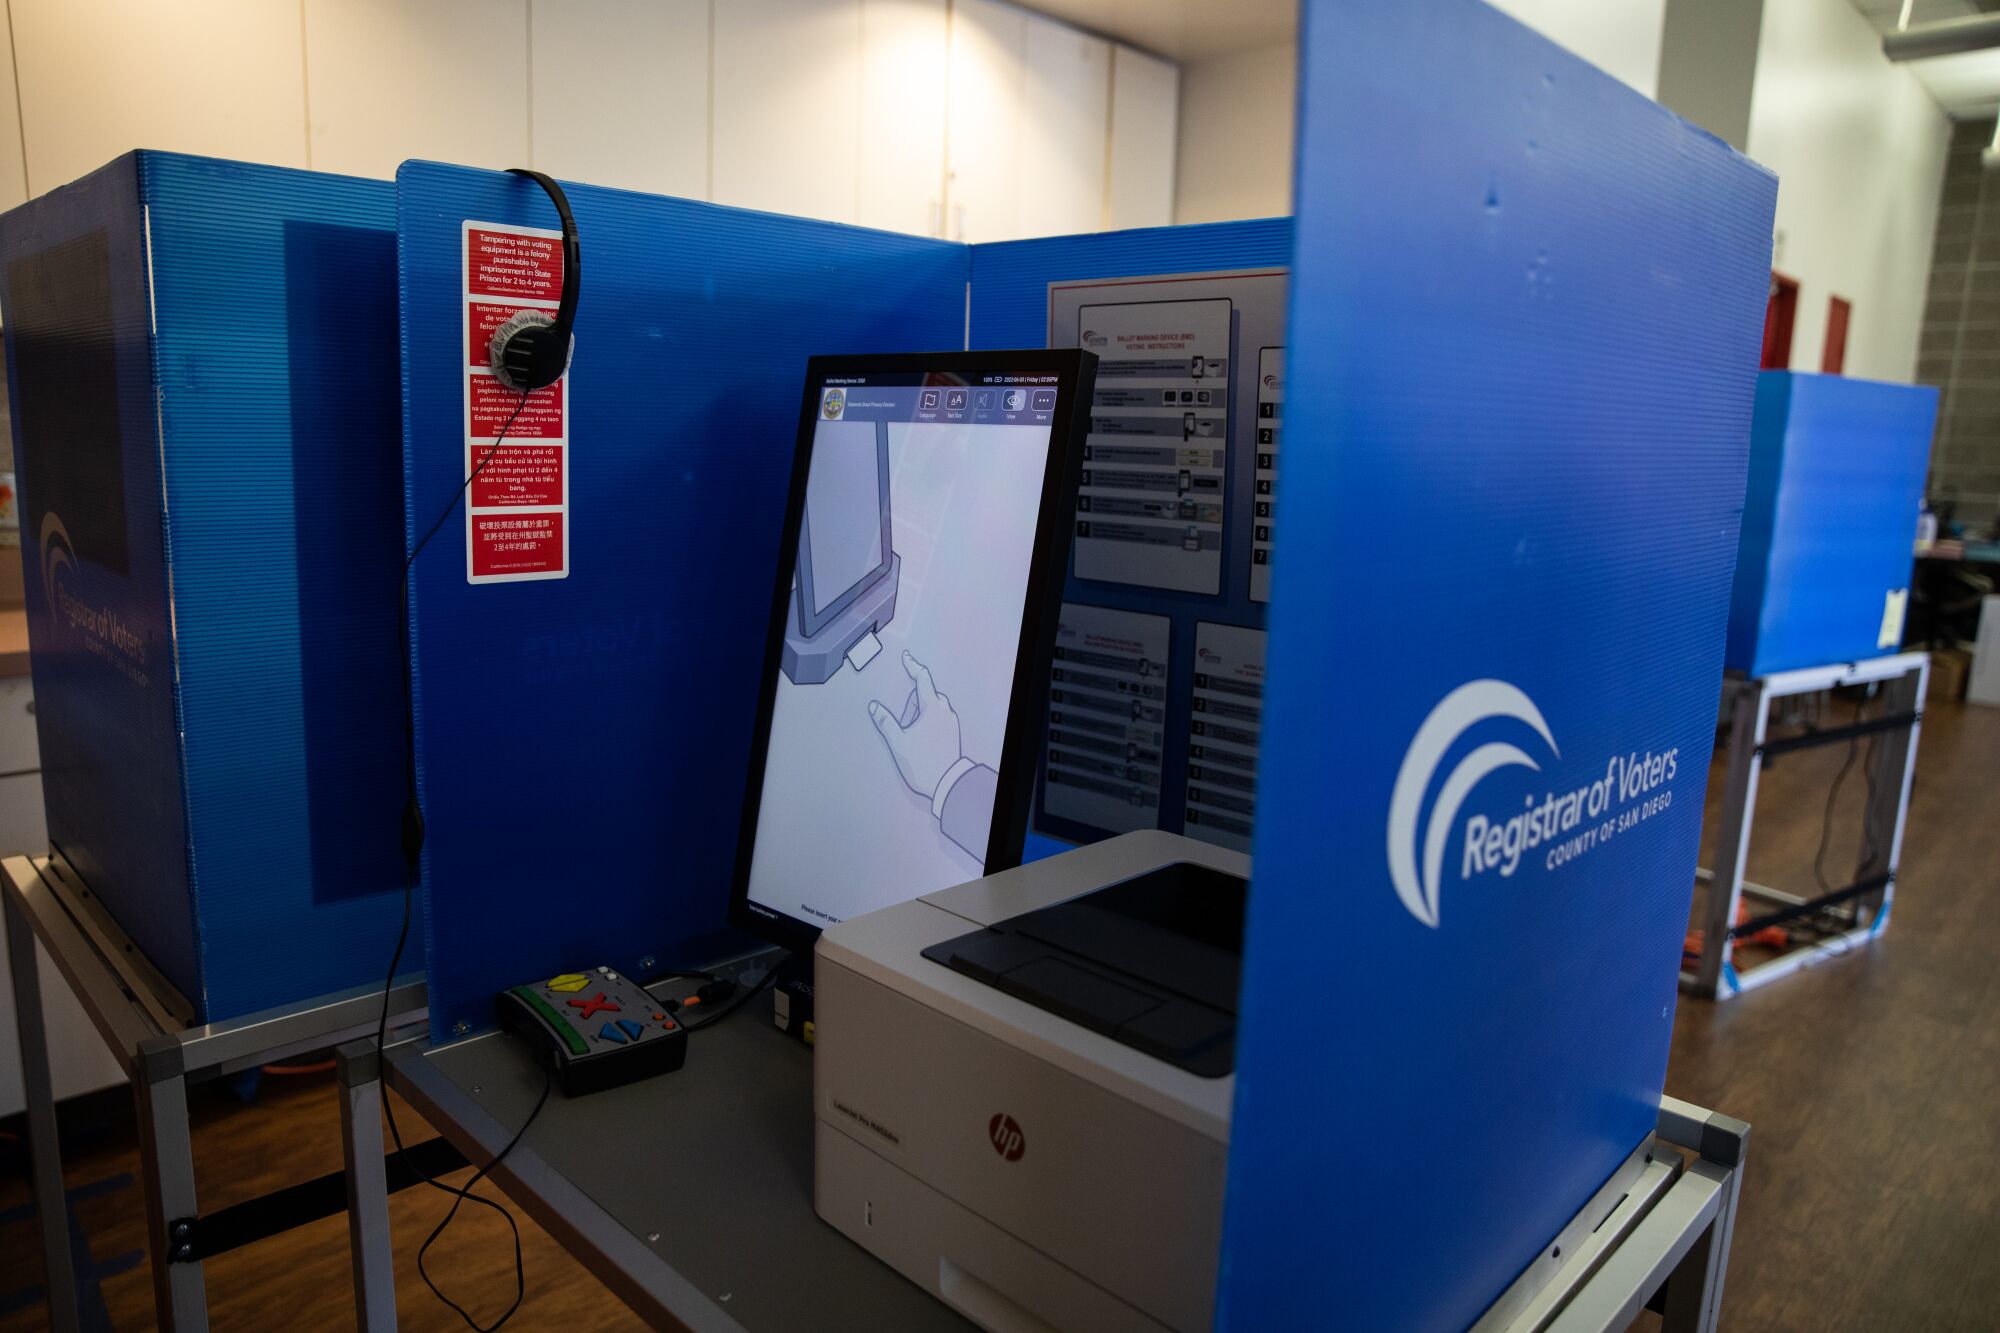 A ballot-marking device at a vote center.